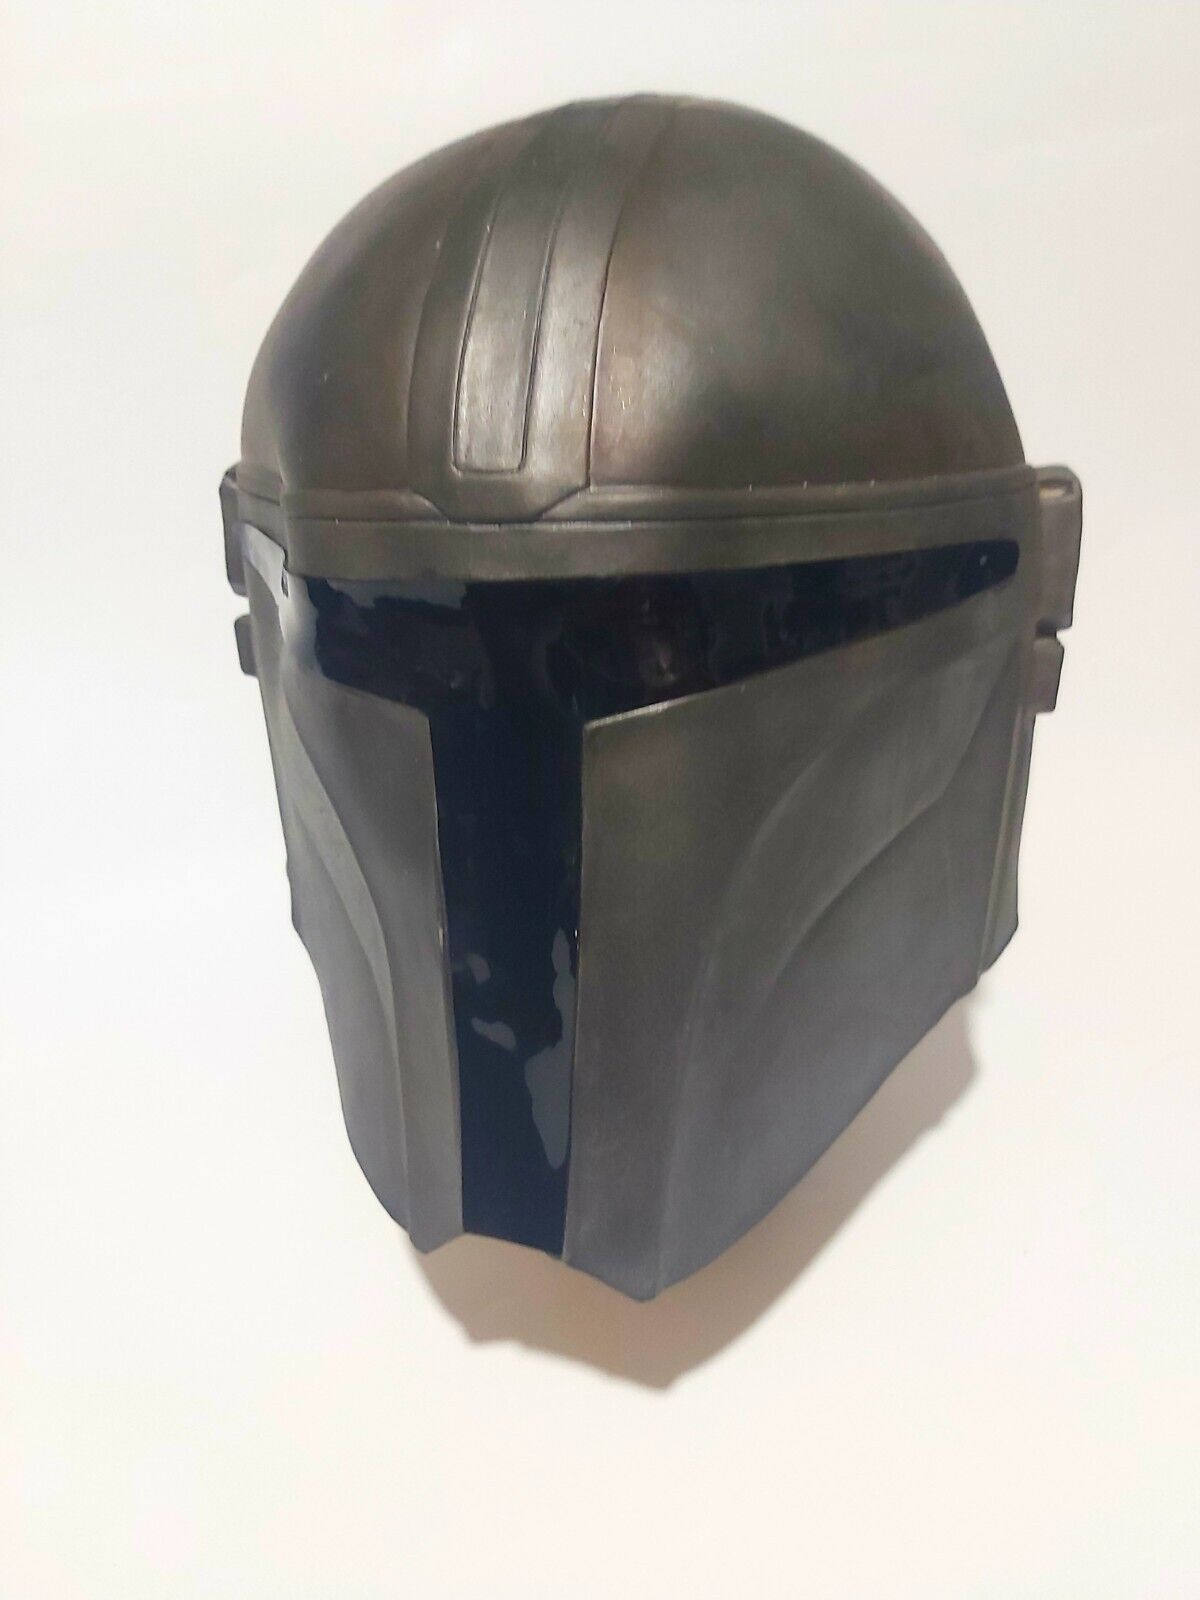 Star Wars Mandalorian Full Face Helmet Rubber Mask, Vintage & Perfect Condition